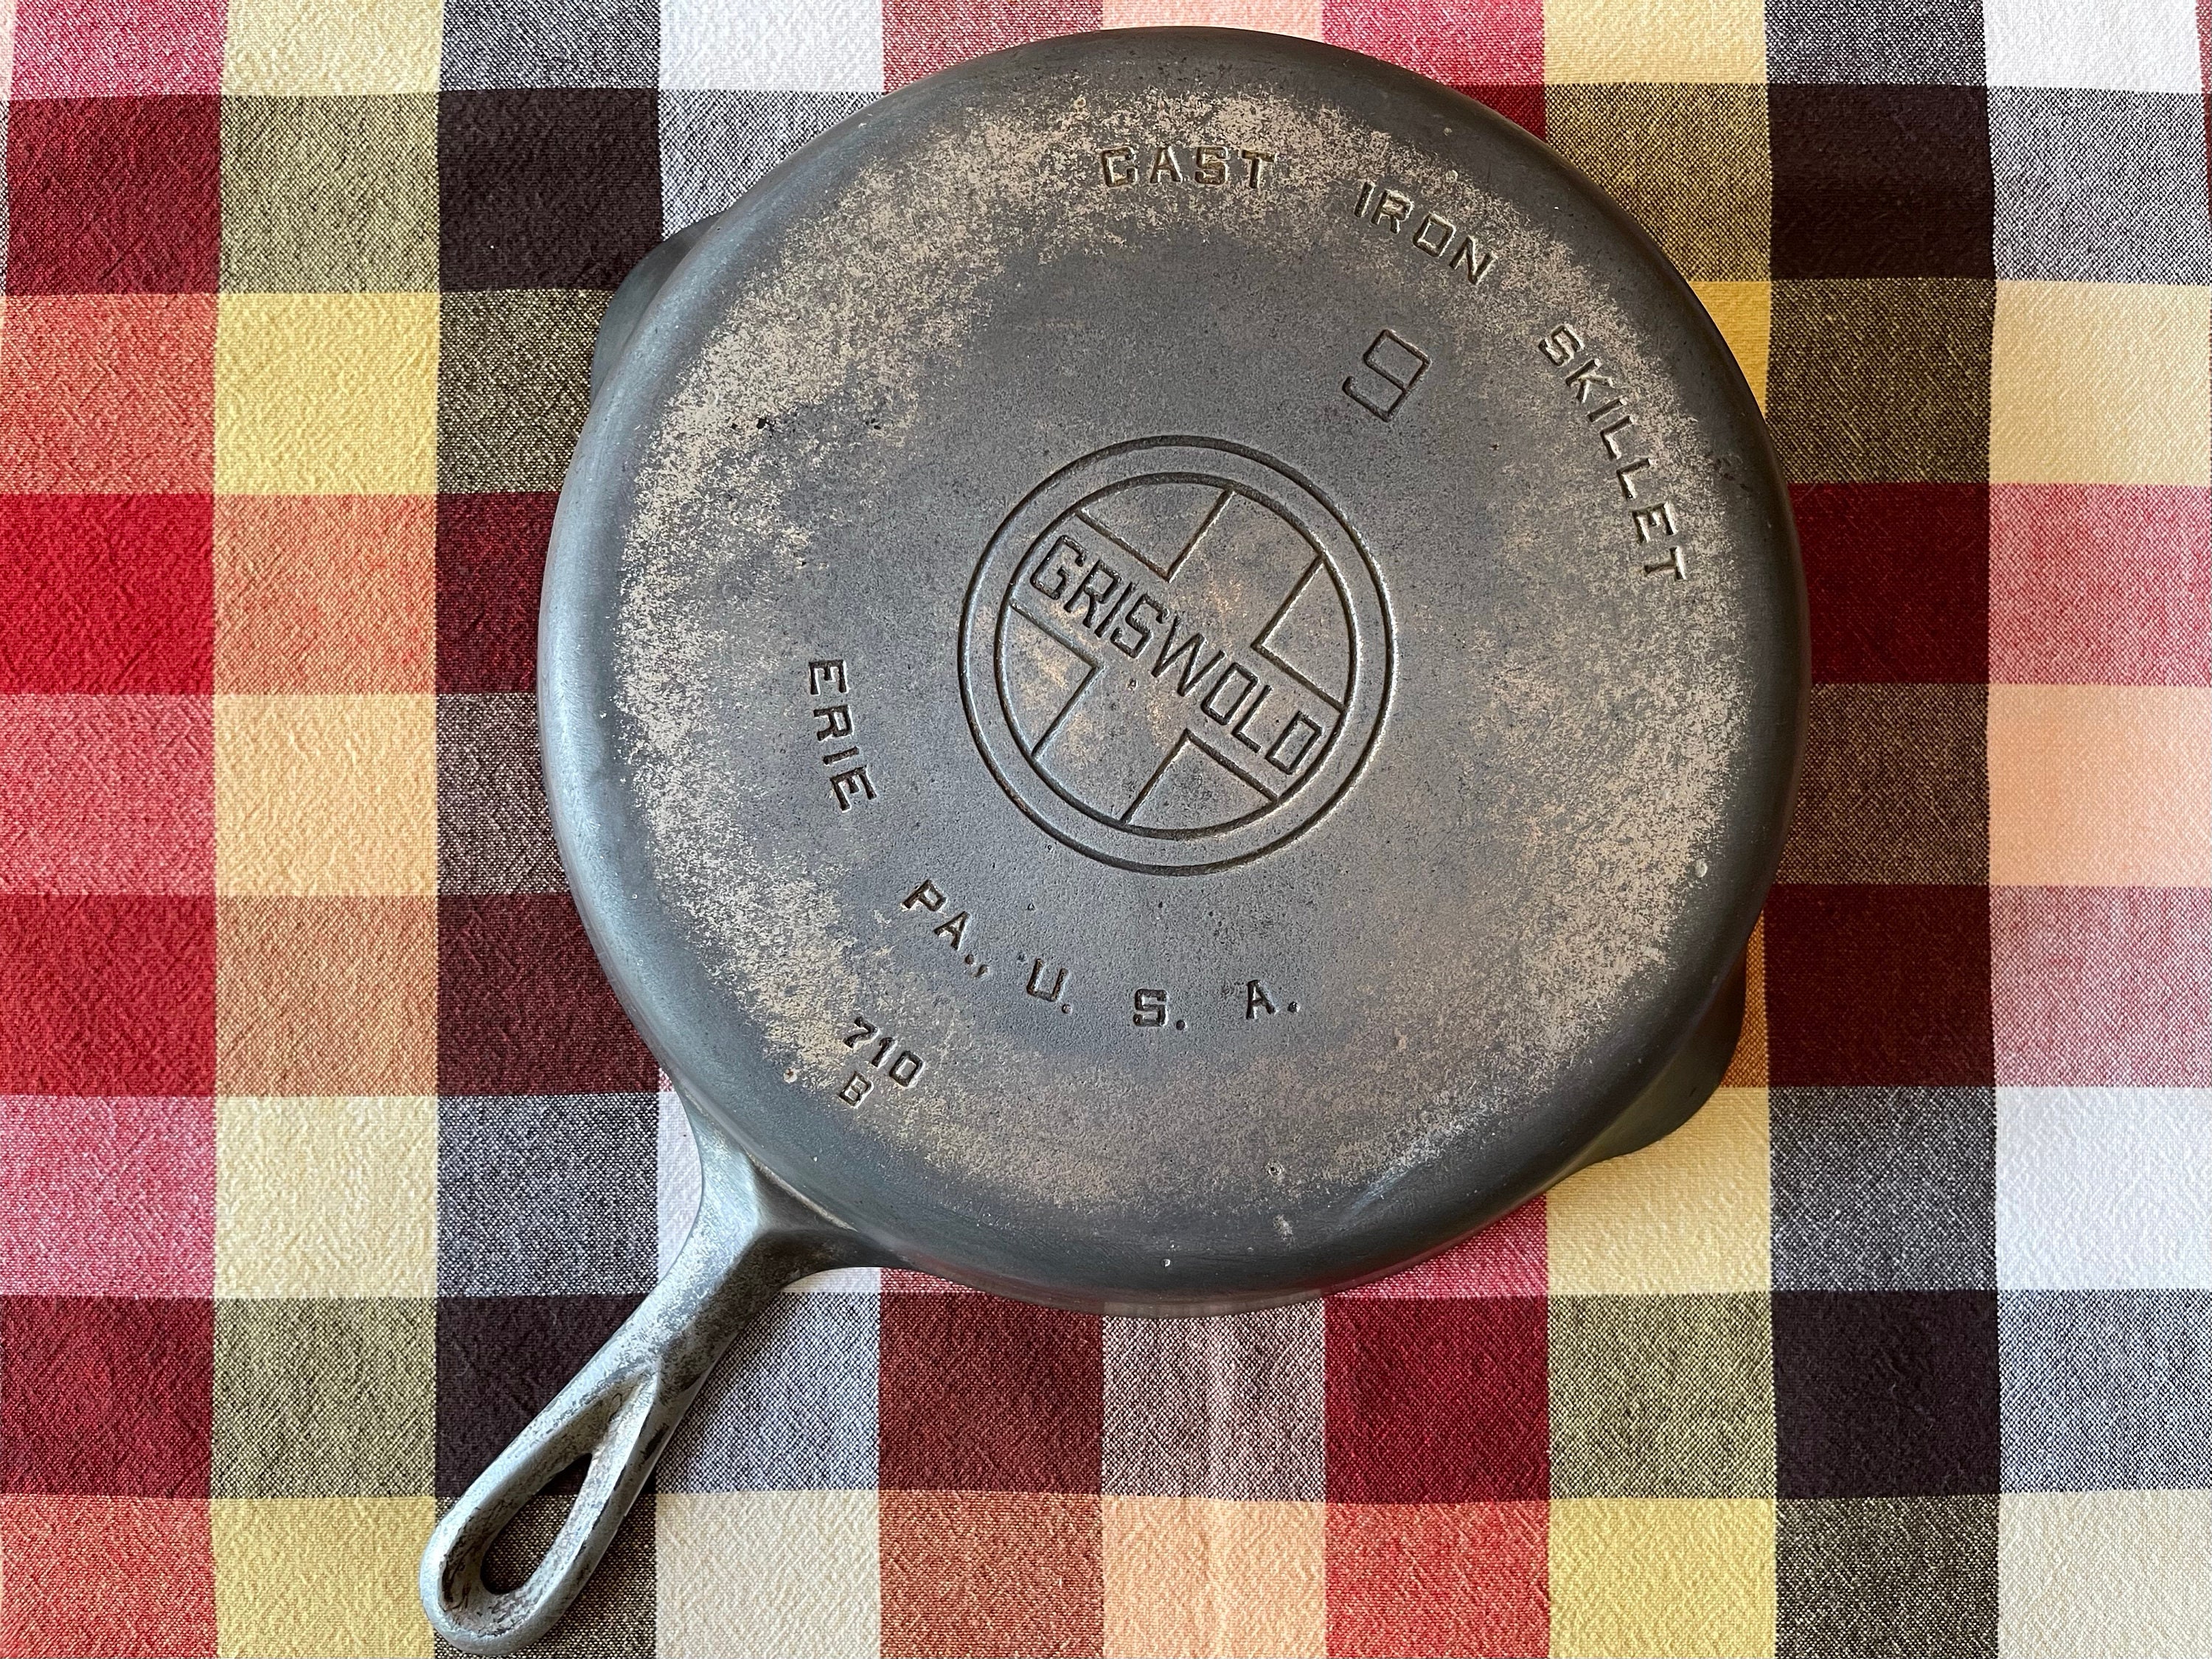 My number 8 Griswold LBL (1930-1939) that I got a couple years ago